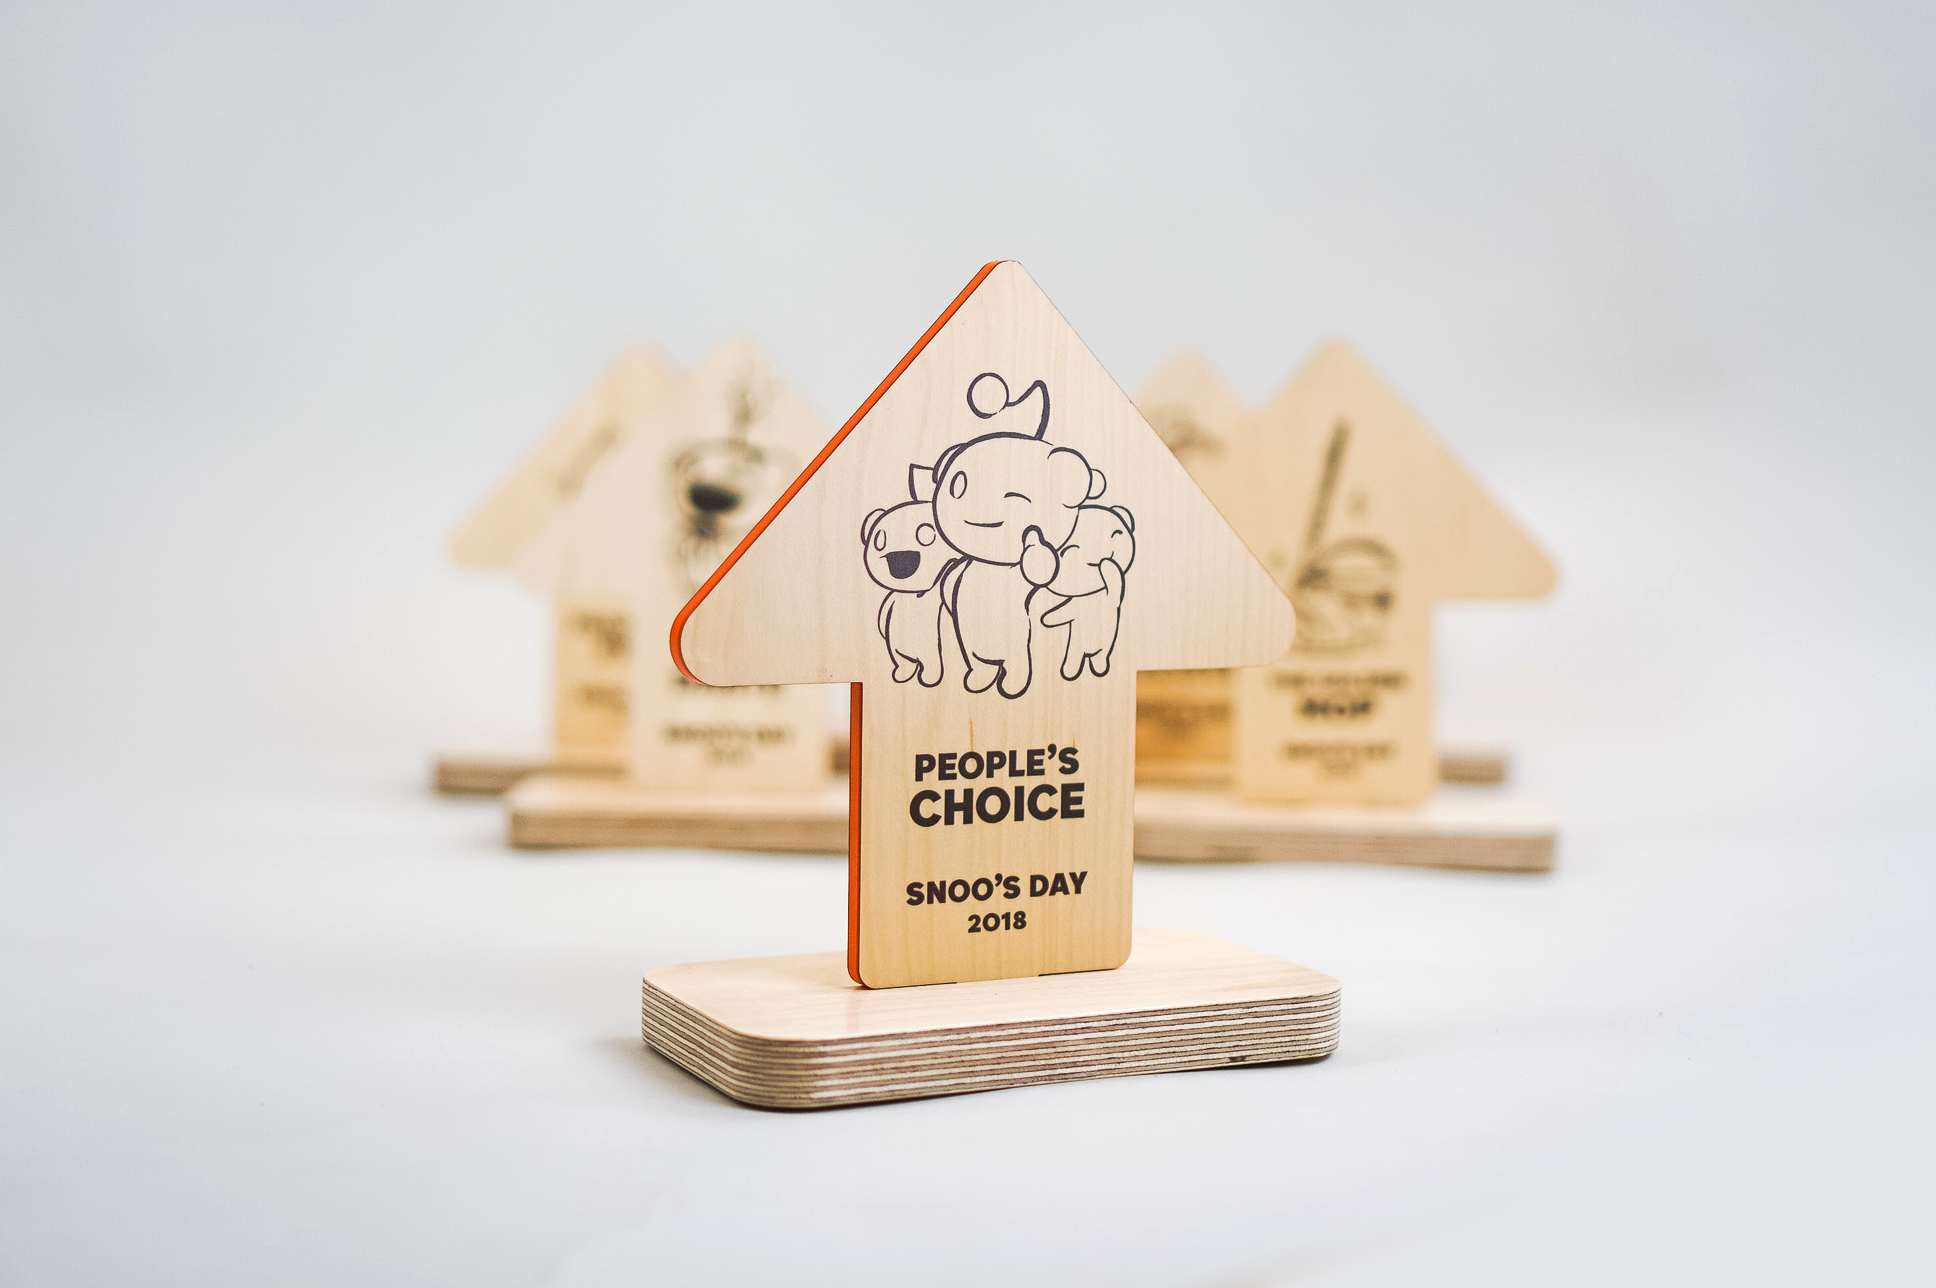 Custom wood arrow shaped 2018 team awards for Reddit, an American social news aggregation, web content rating, and discussion website.